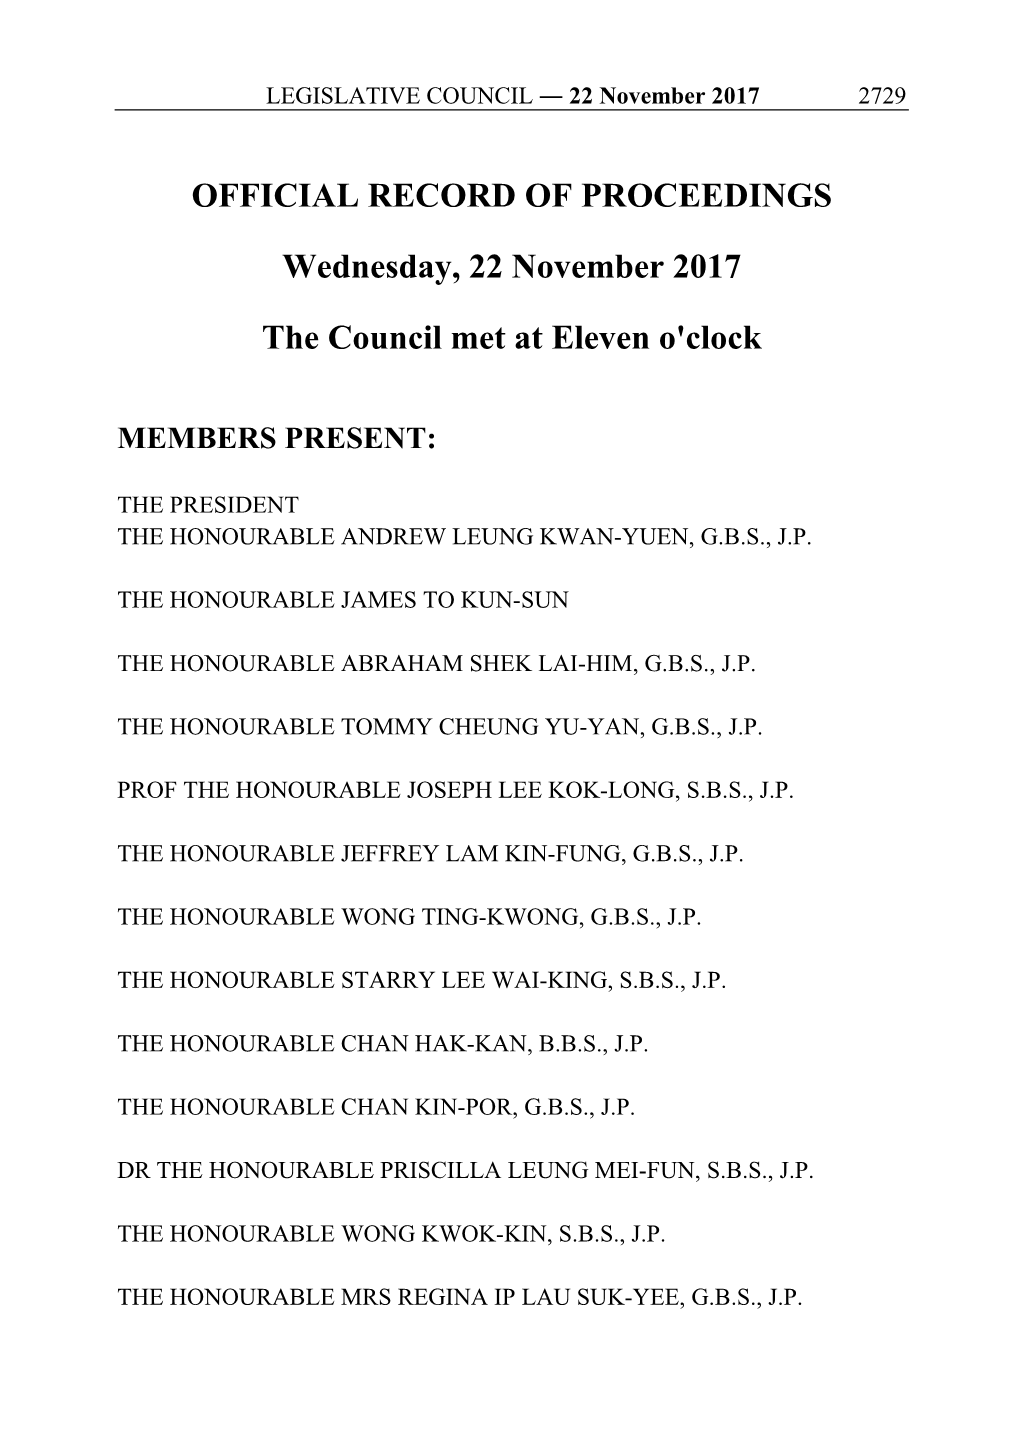 OFFICIAL RECORD of PROCEEDINGS Wednesday, 22